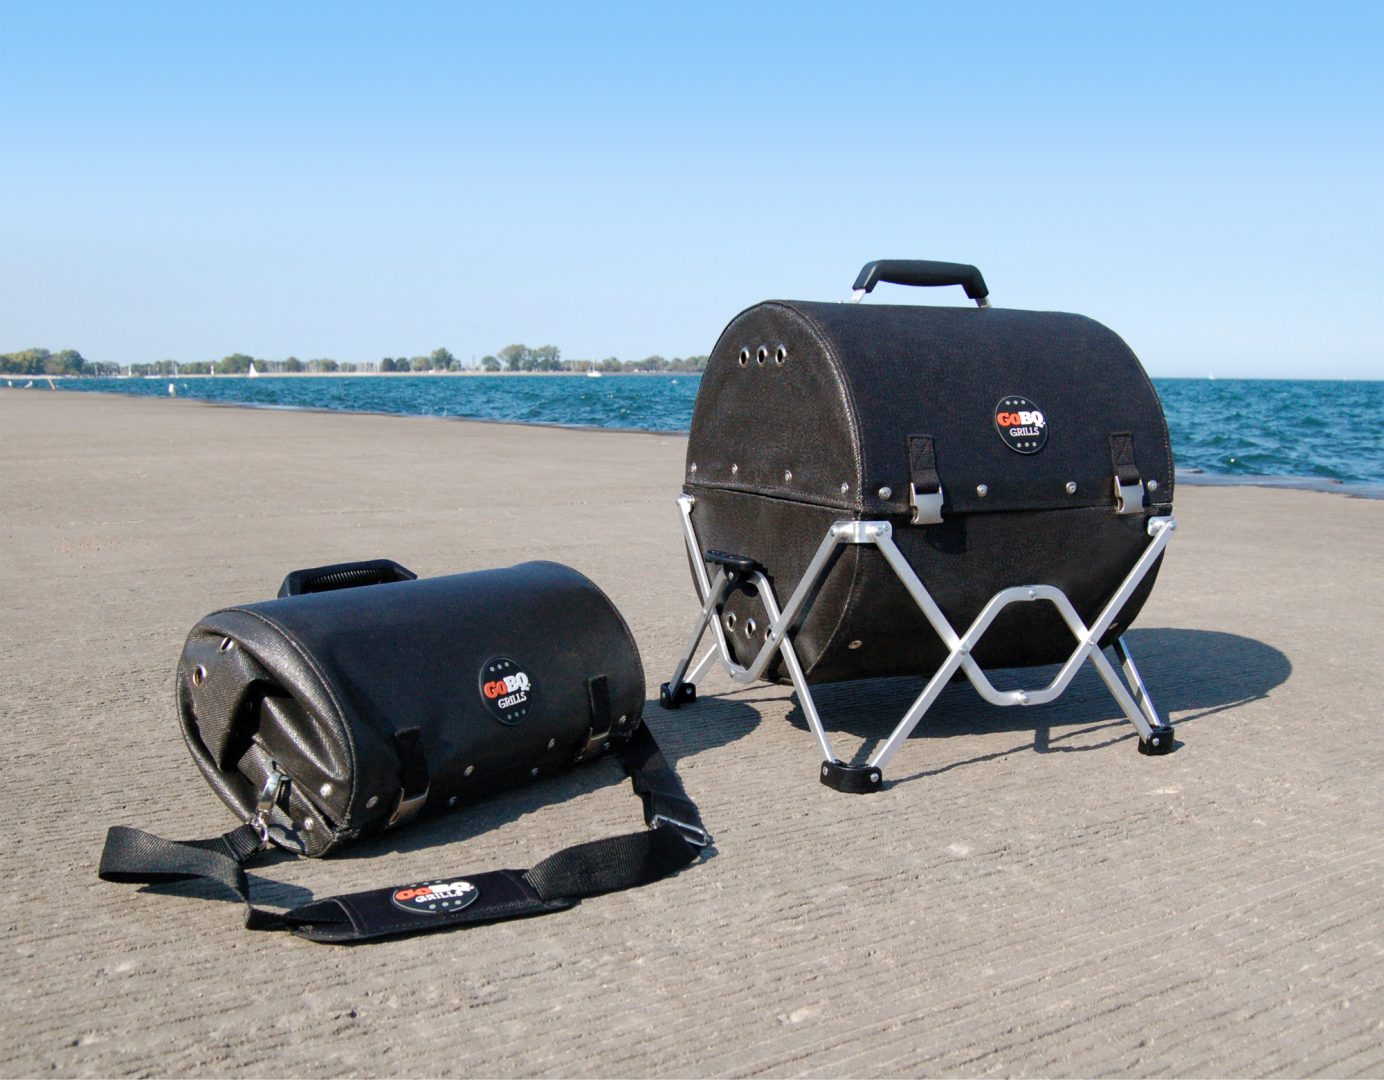 Grill Review: The GoBQ, Portable Grill That Is Durable & Foldable